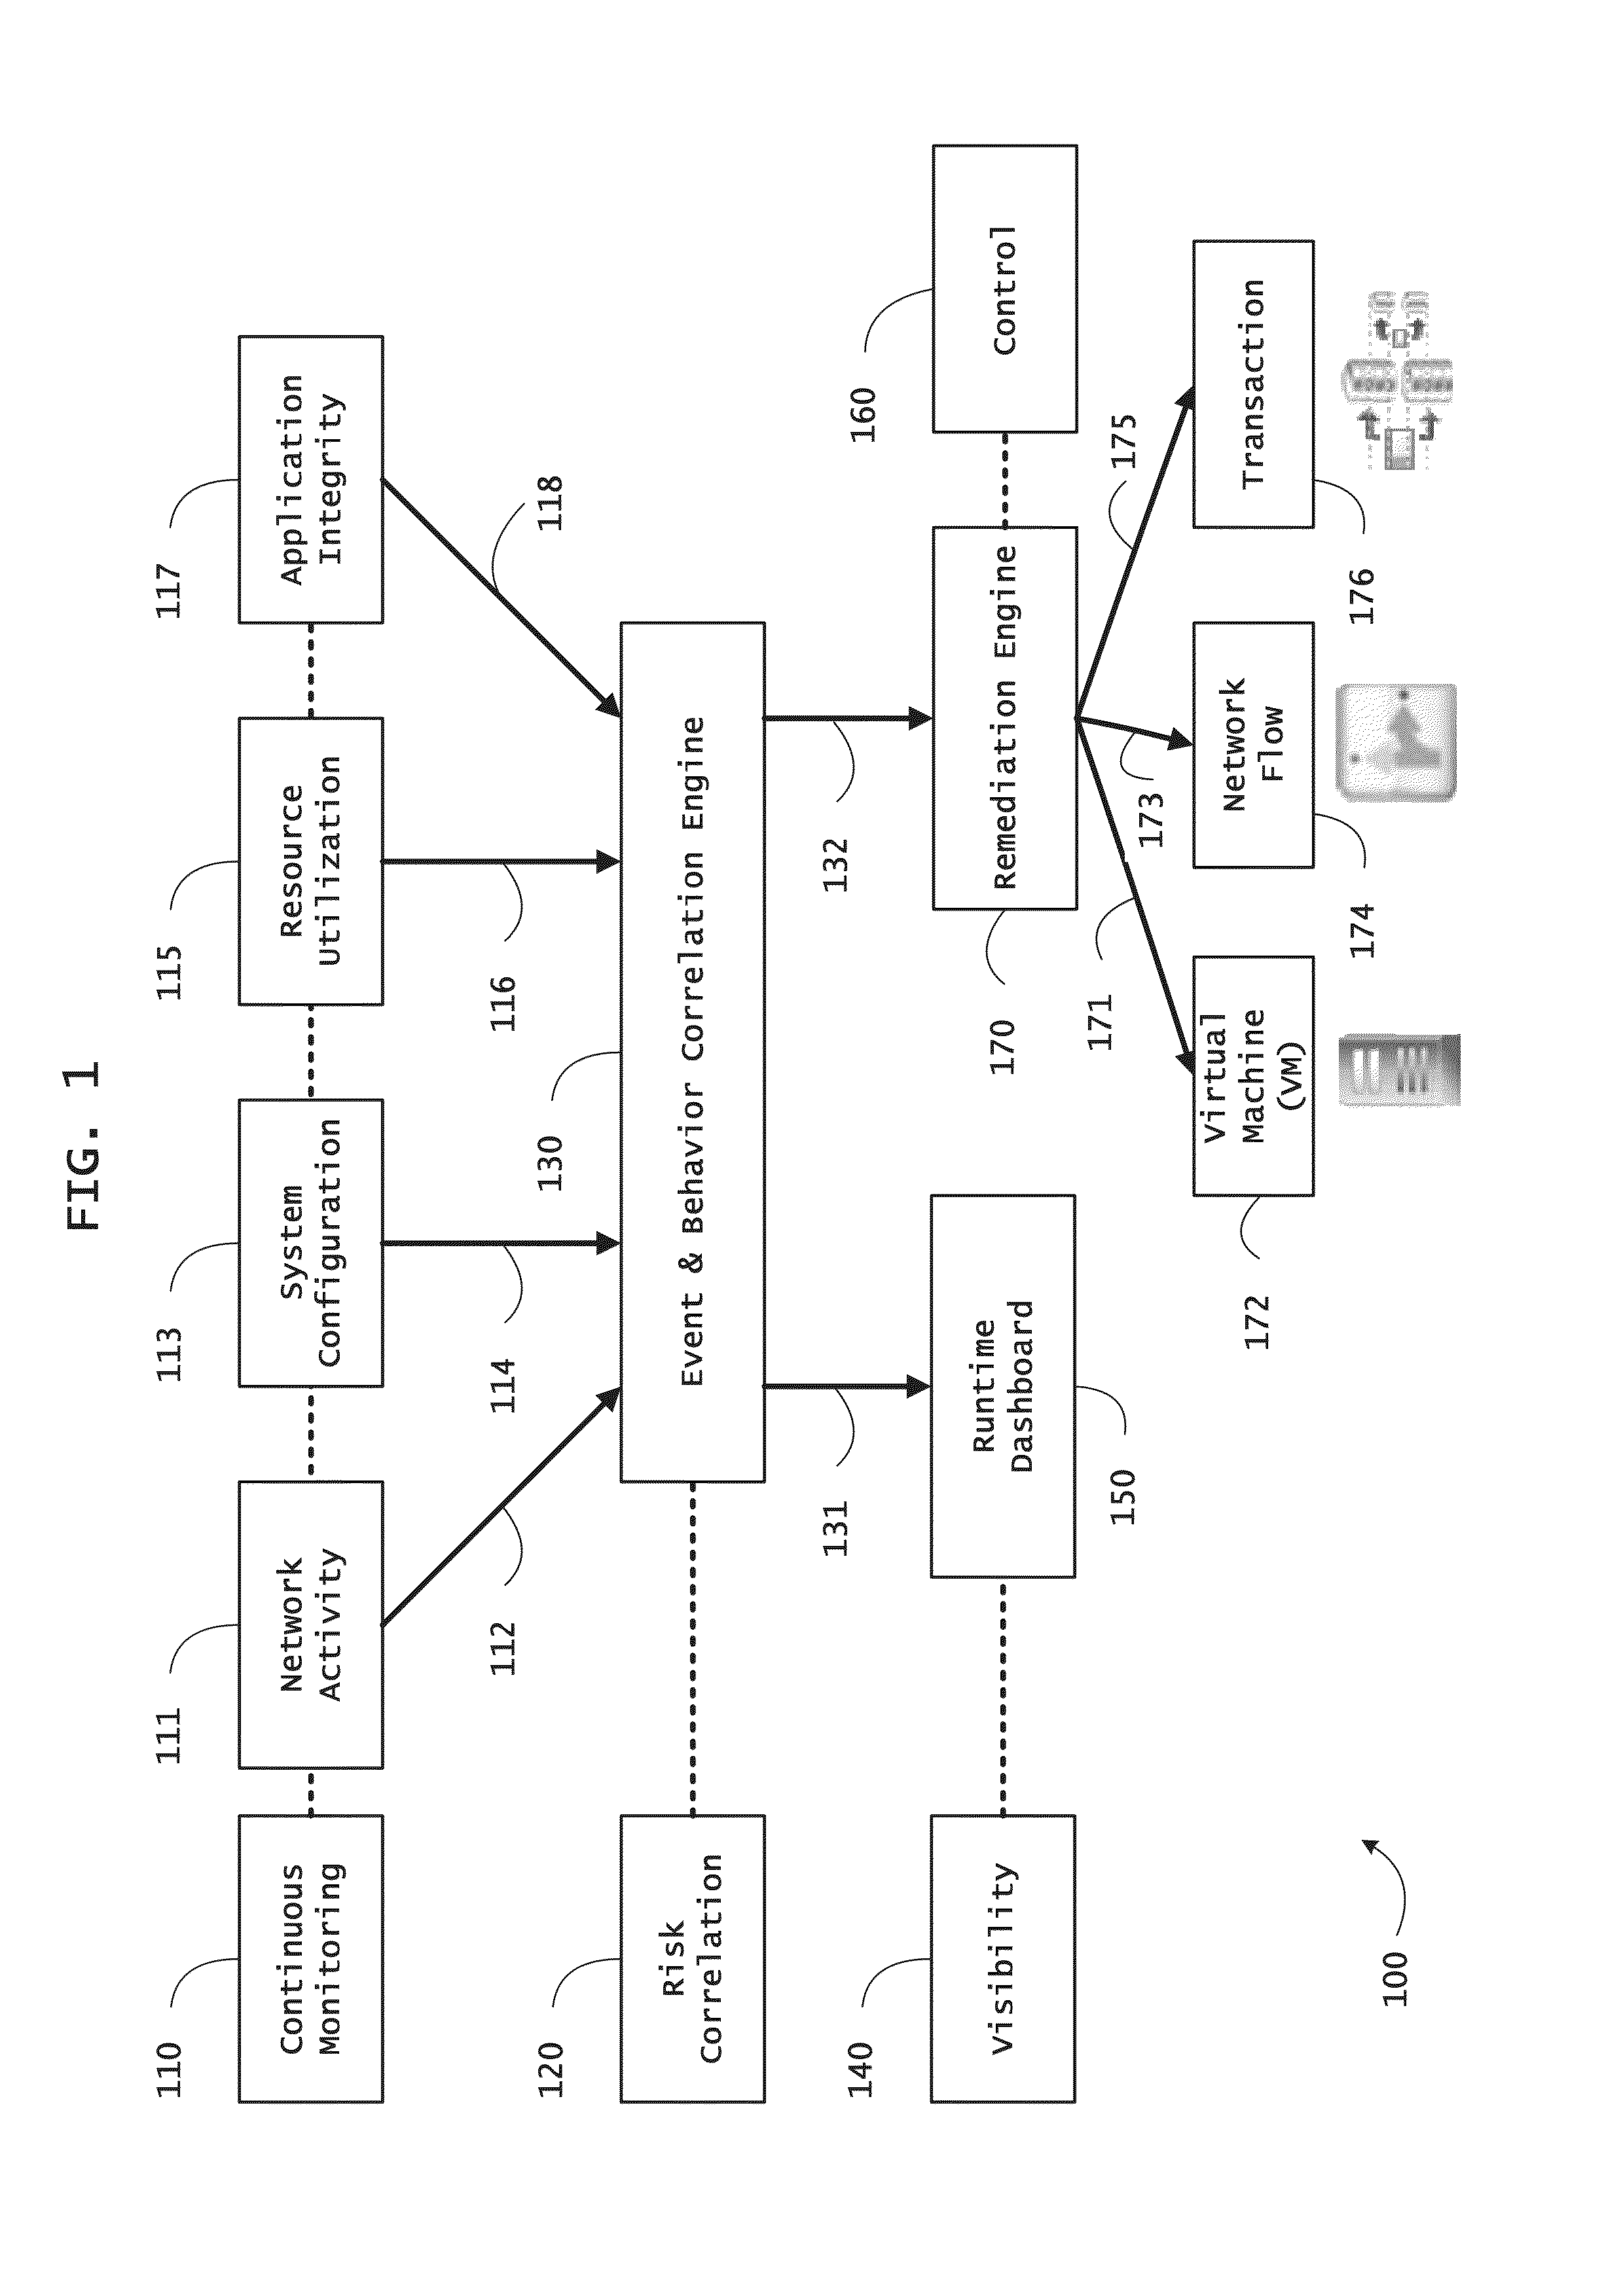 Systems and methods for threat identification and remediation